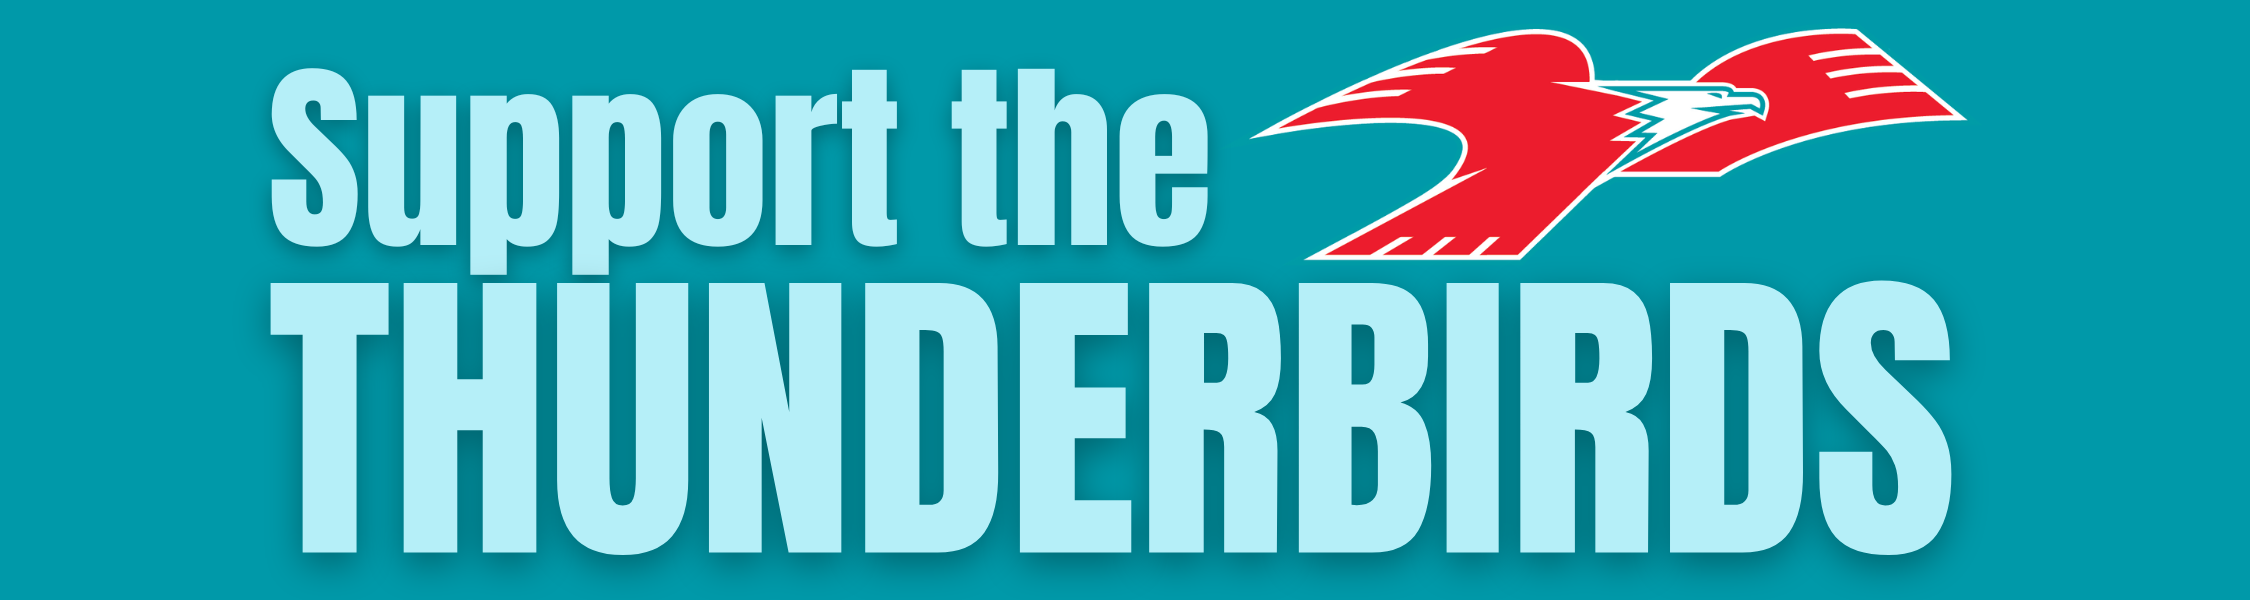 Support the Thunderbirds